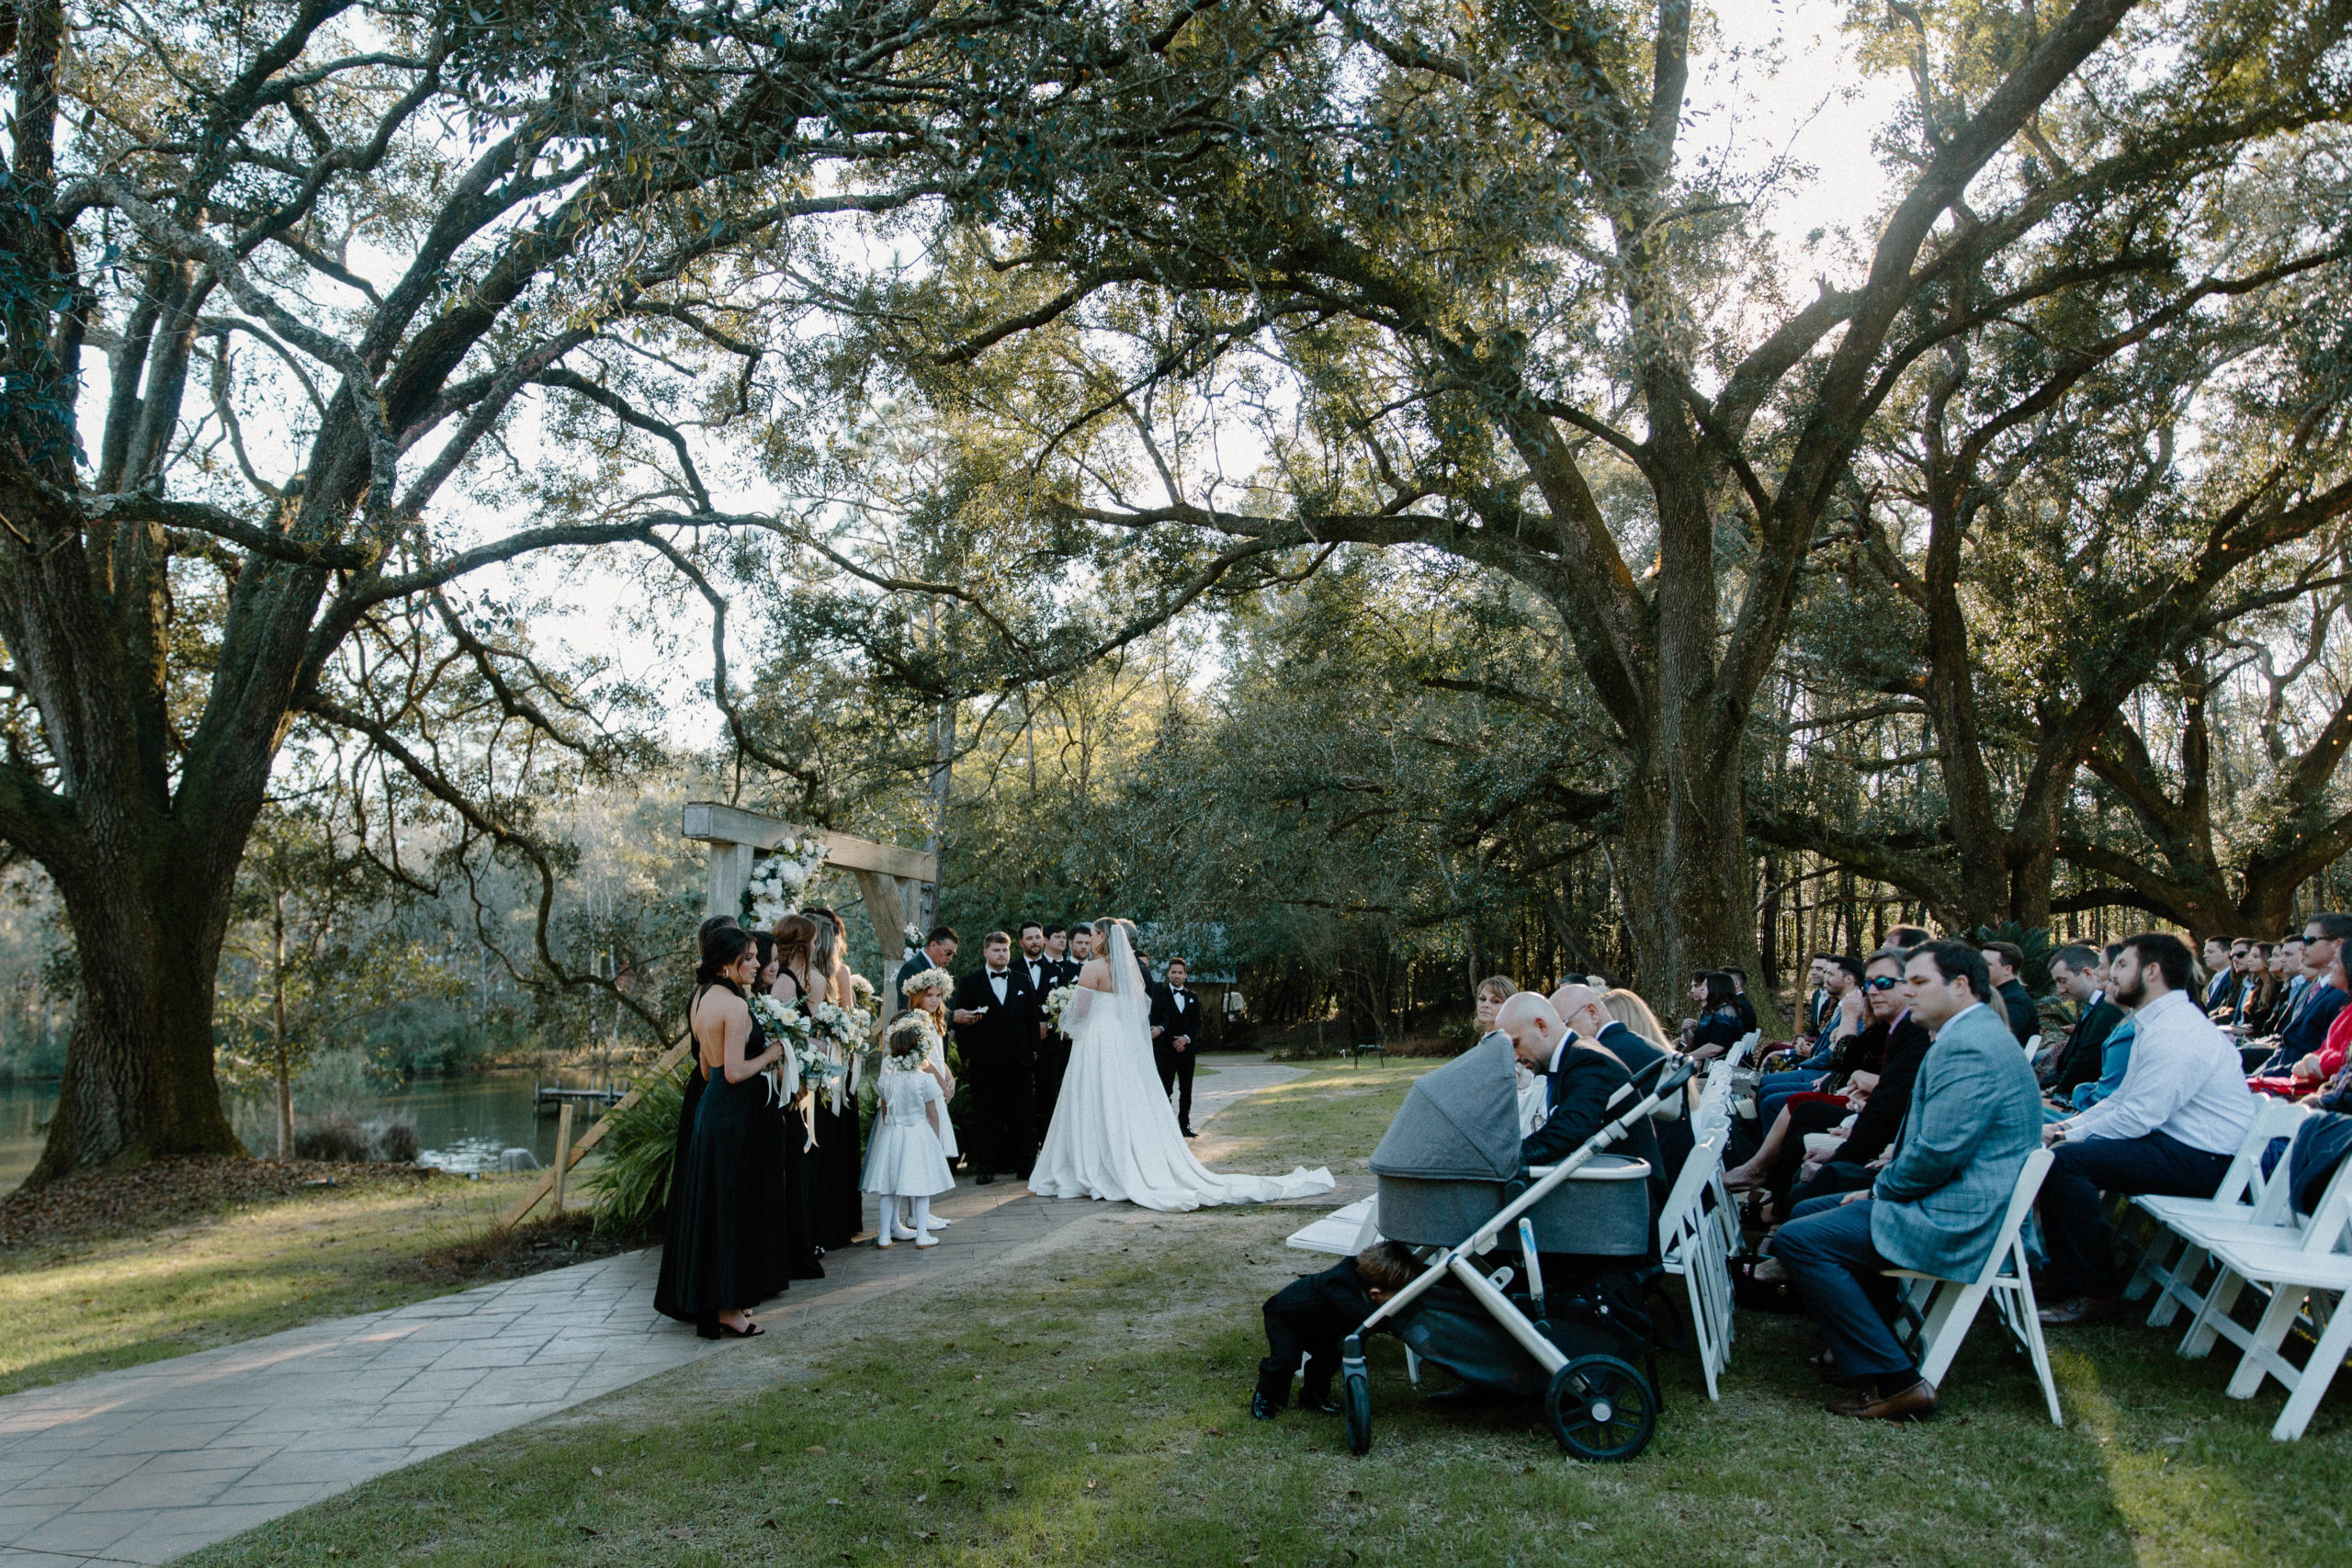 A couple standing at the front of the aisle during their outdoor Pensacola wedding ceremony